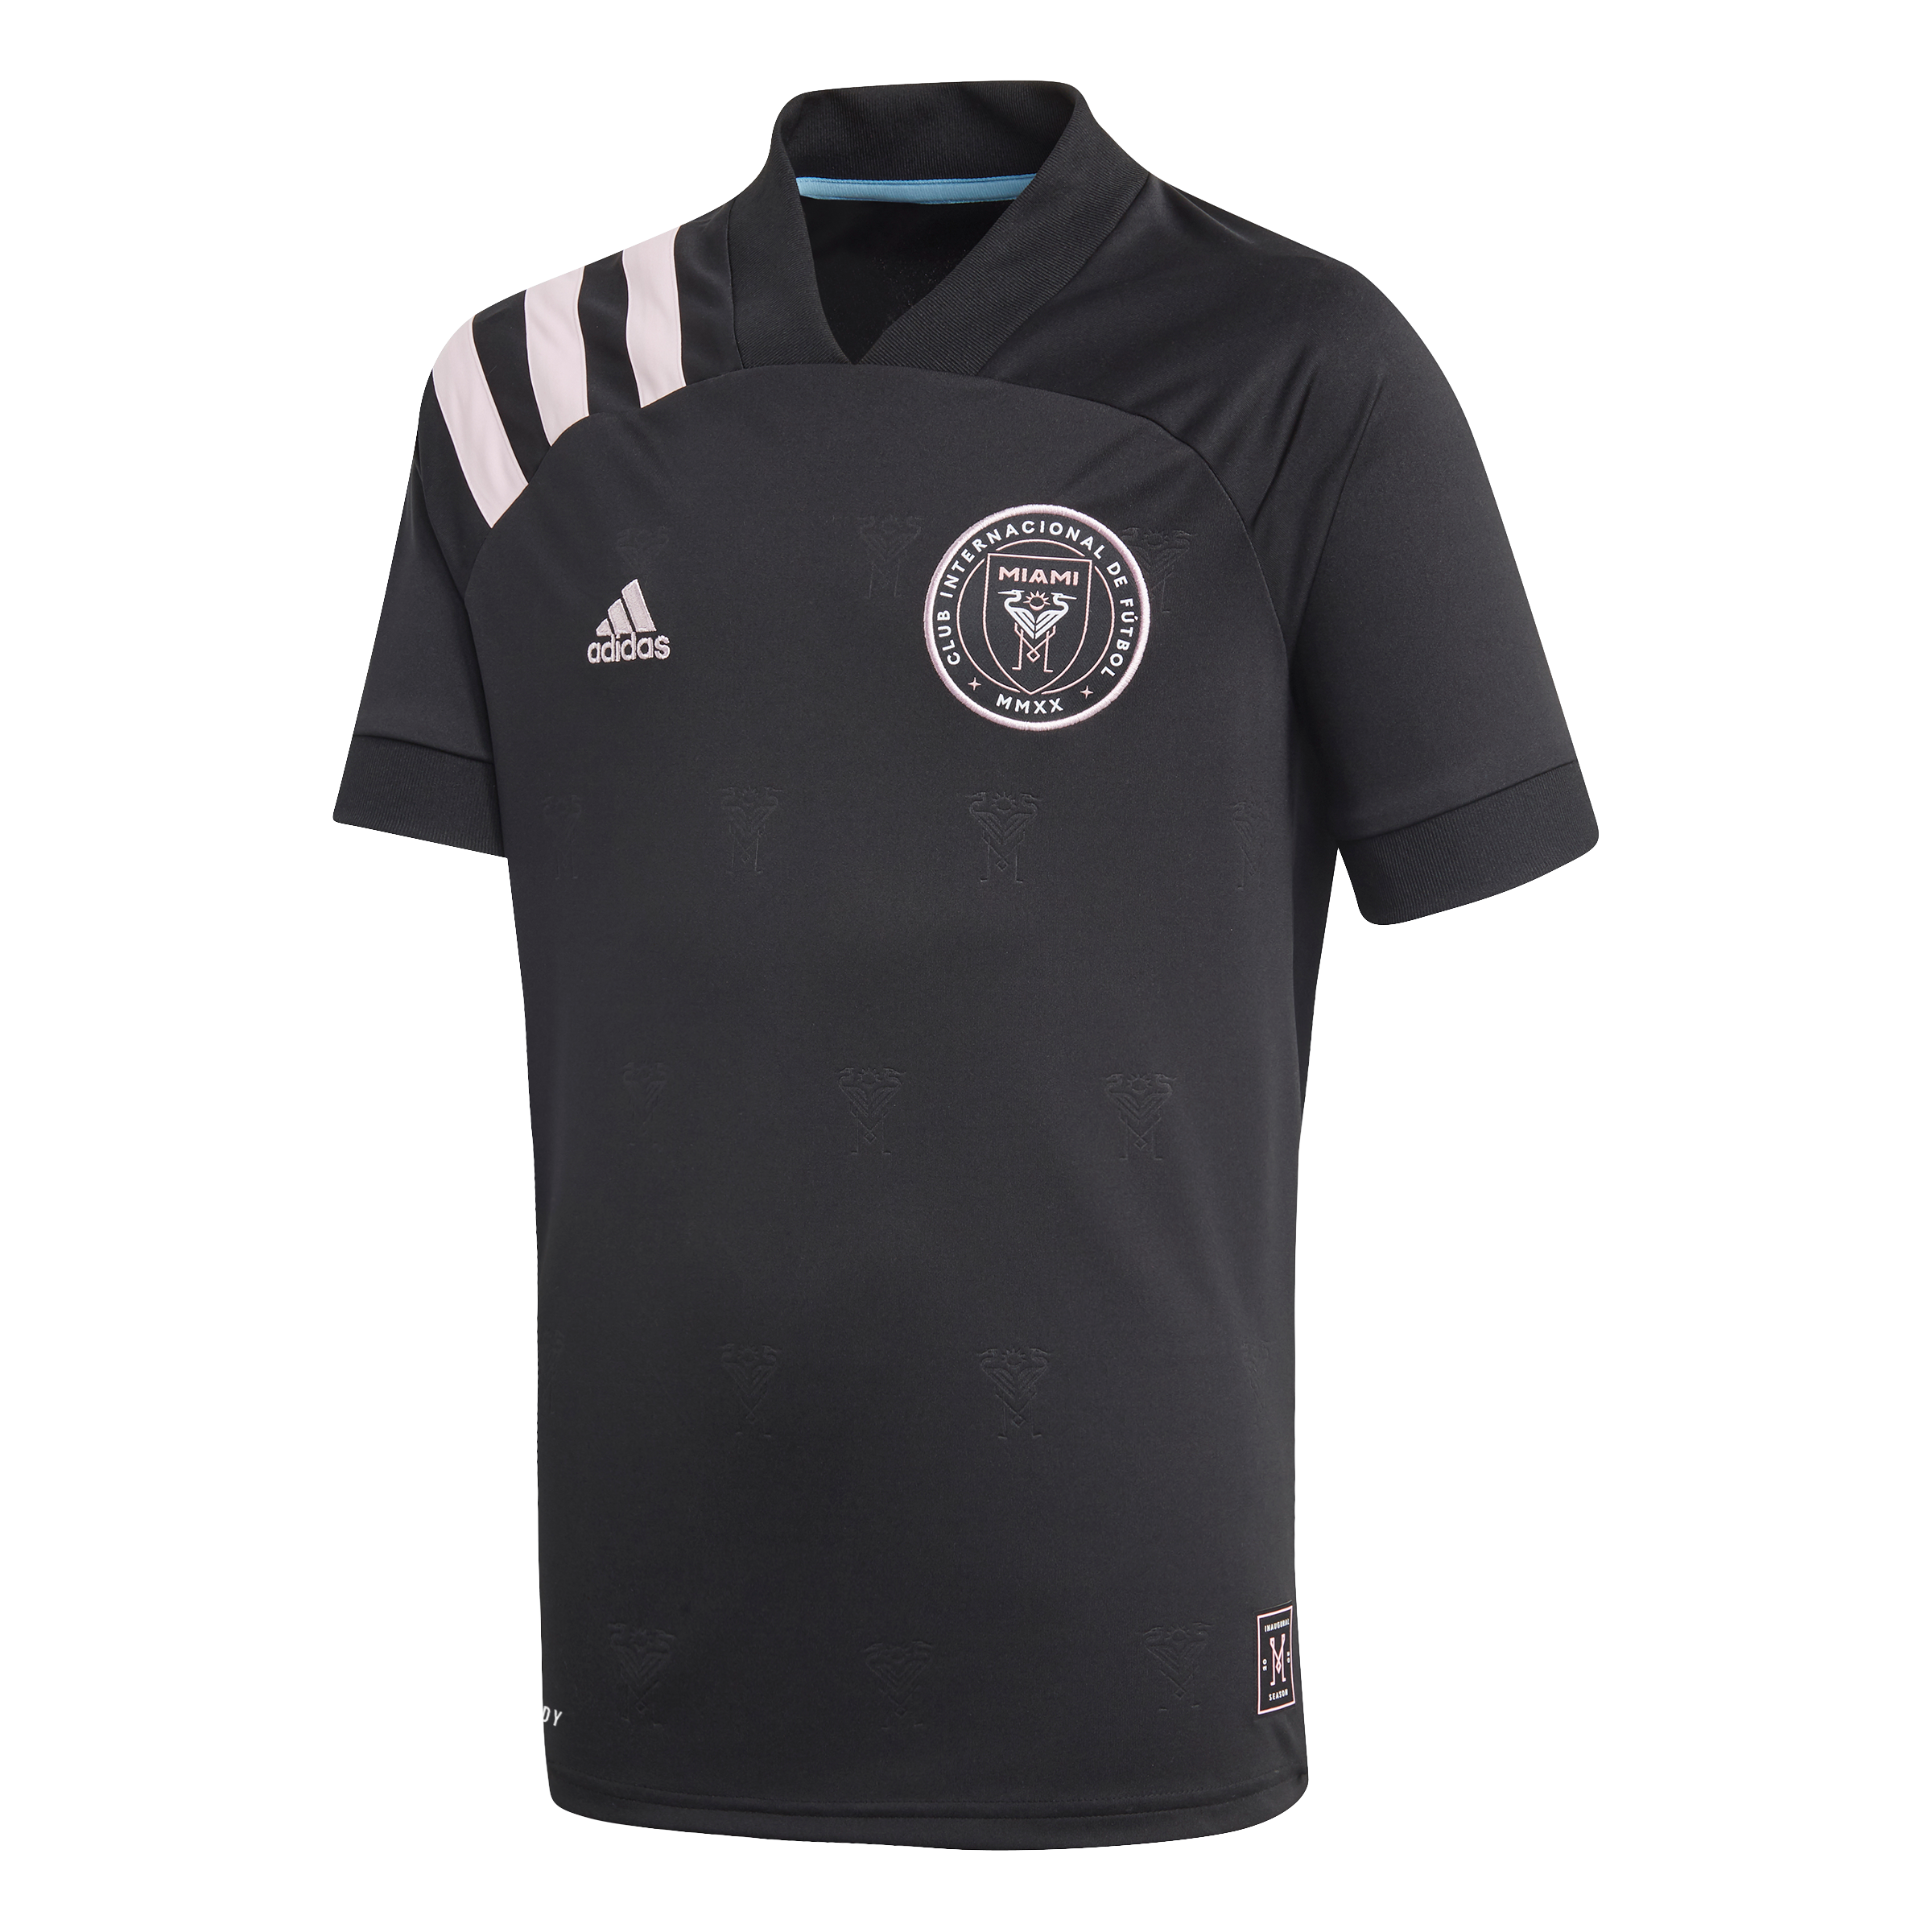 Inter Miami CF IMCF Youth Replica Away Soccer Jersey - Black